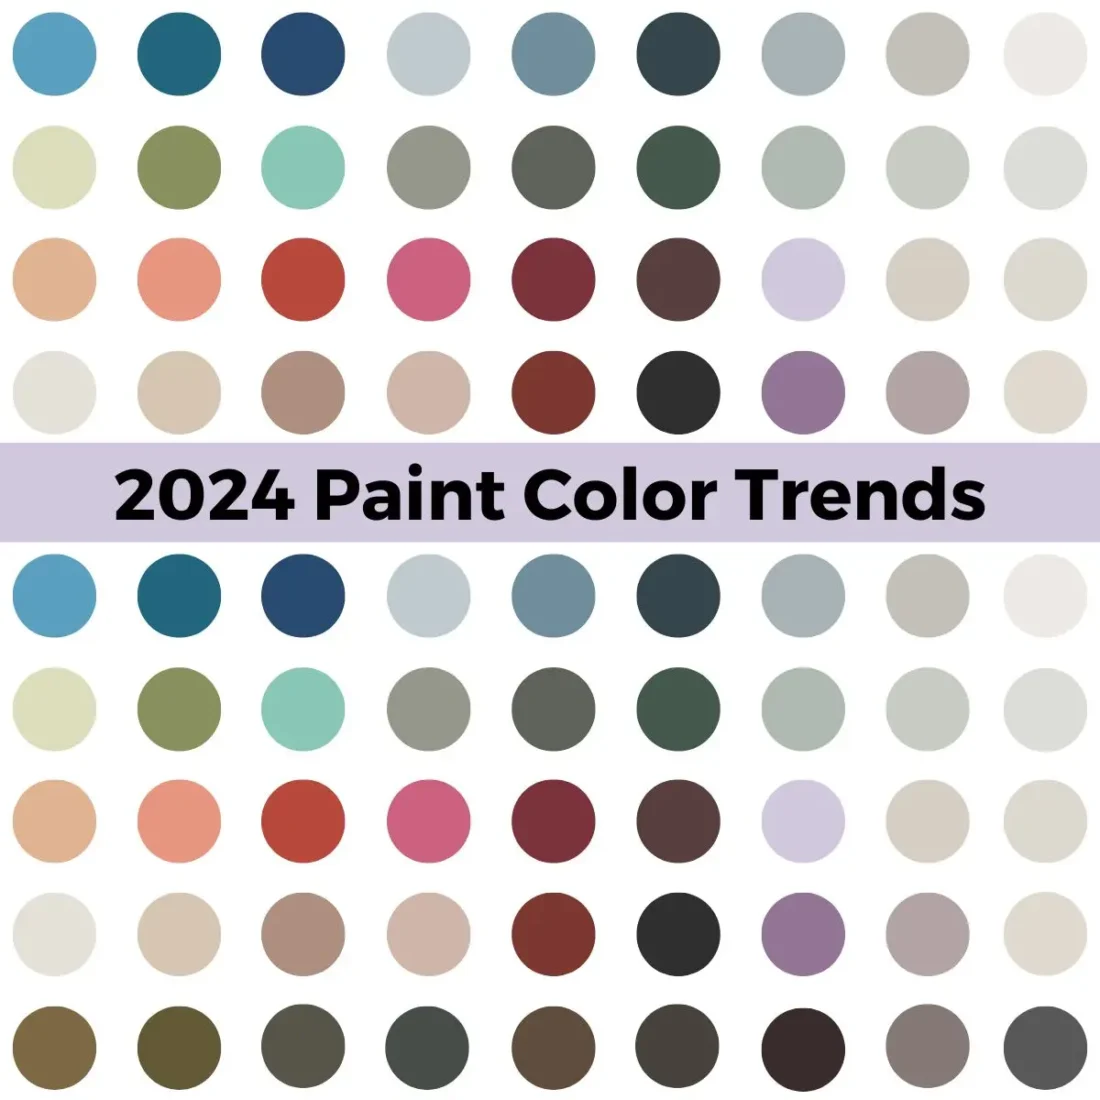 2024 Paint Colors Trends ashely adelice